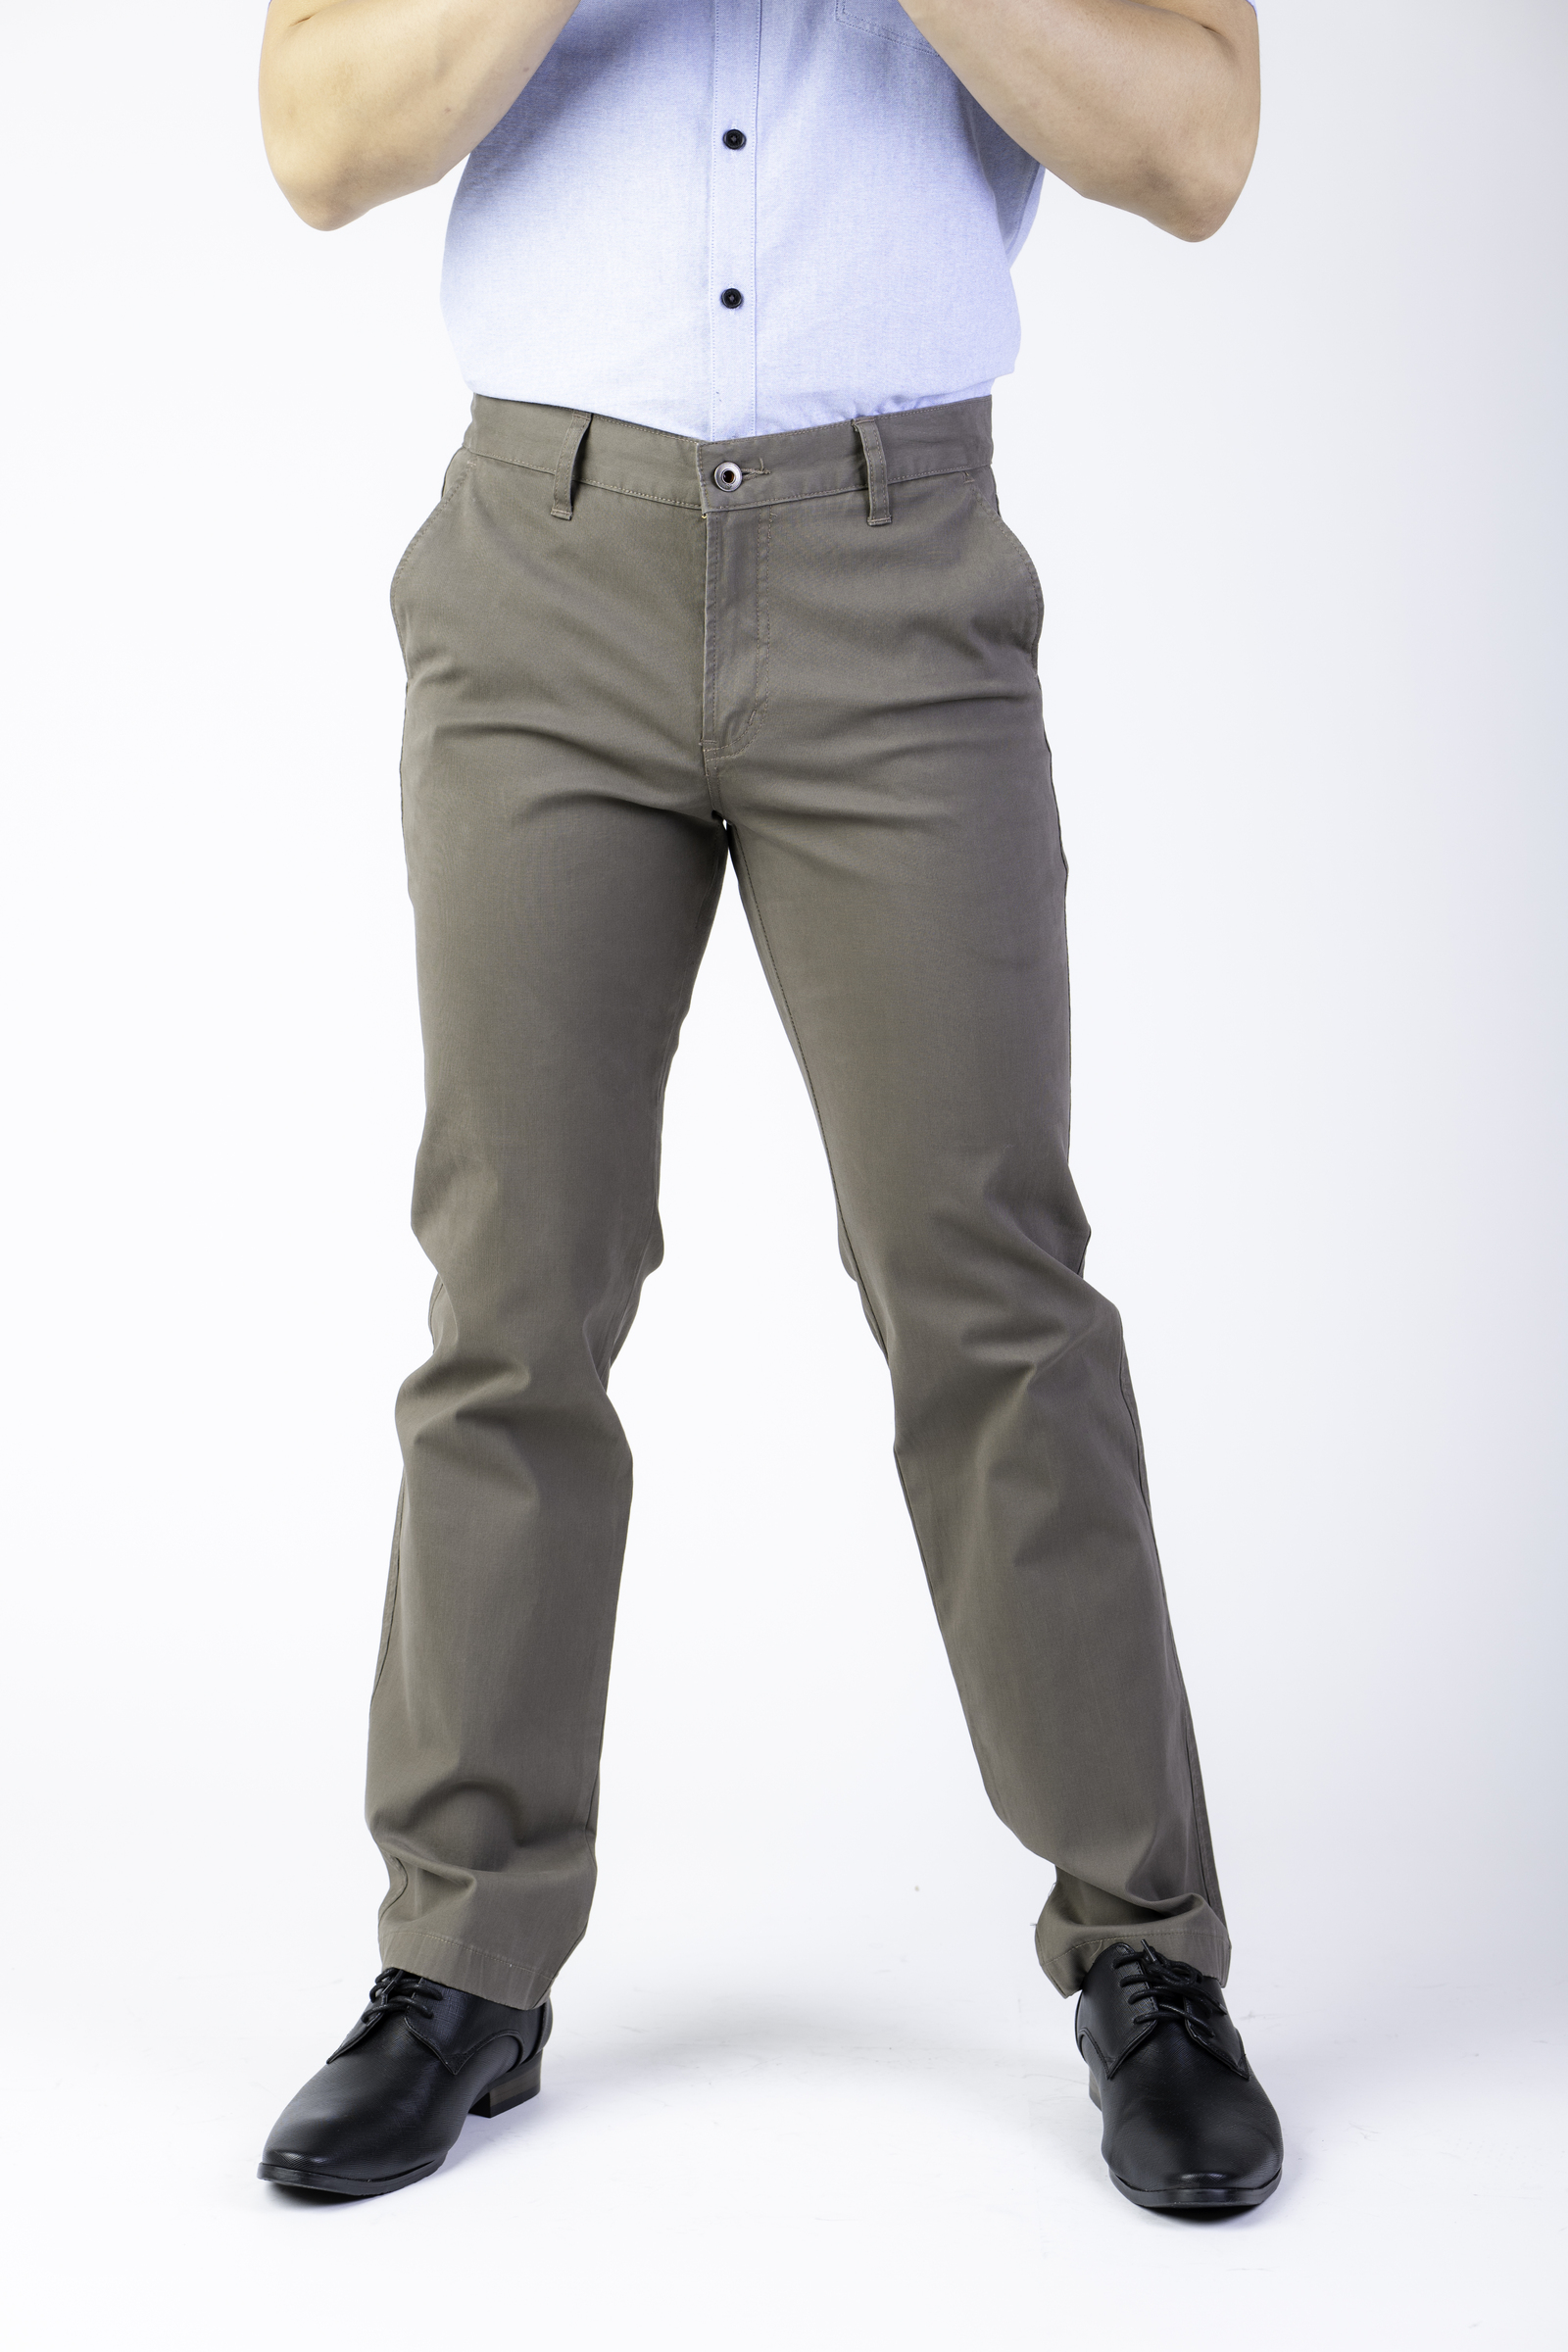 fashionly Slim Fit Men Grey Khaki Trousers  Buy fashionly Slim Fit Men  Grey Khaki Trousers Online at Best Prices in India  Flipkartcom